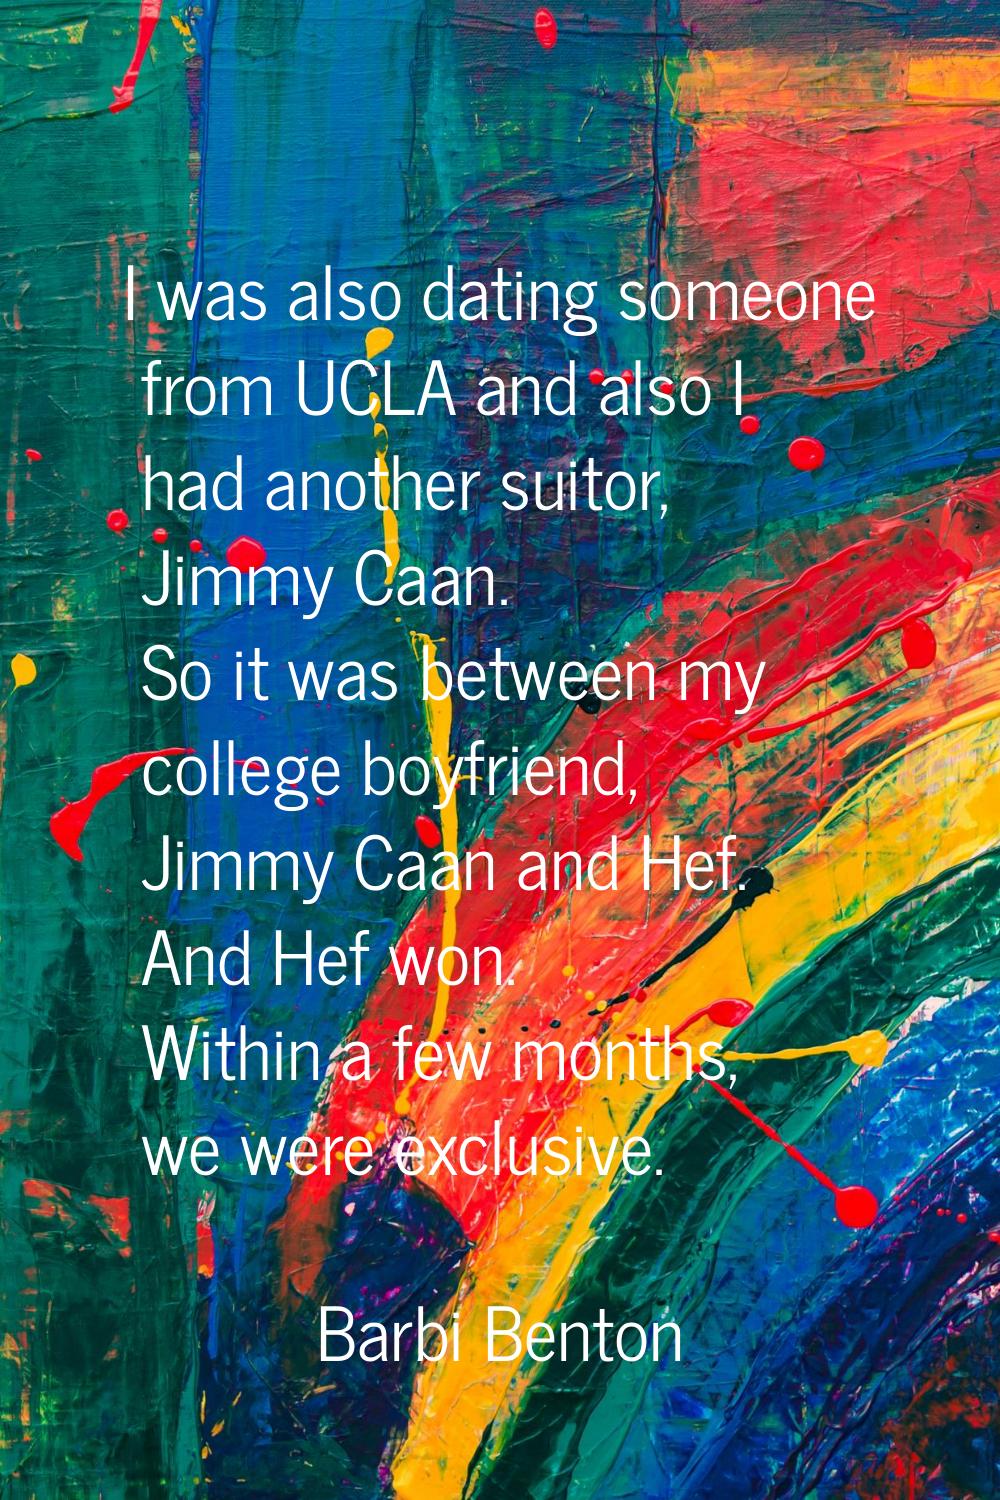 I was also dating someone from UCLA and also I had another suitor, Jimmy Caan. So it was between my